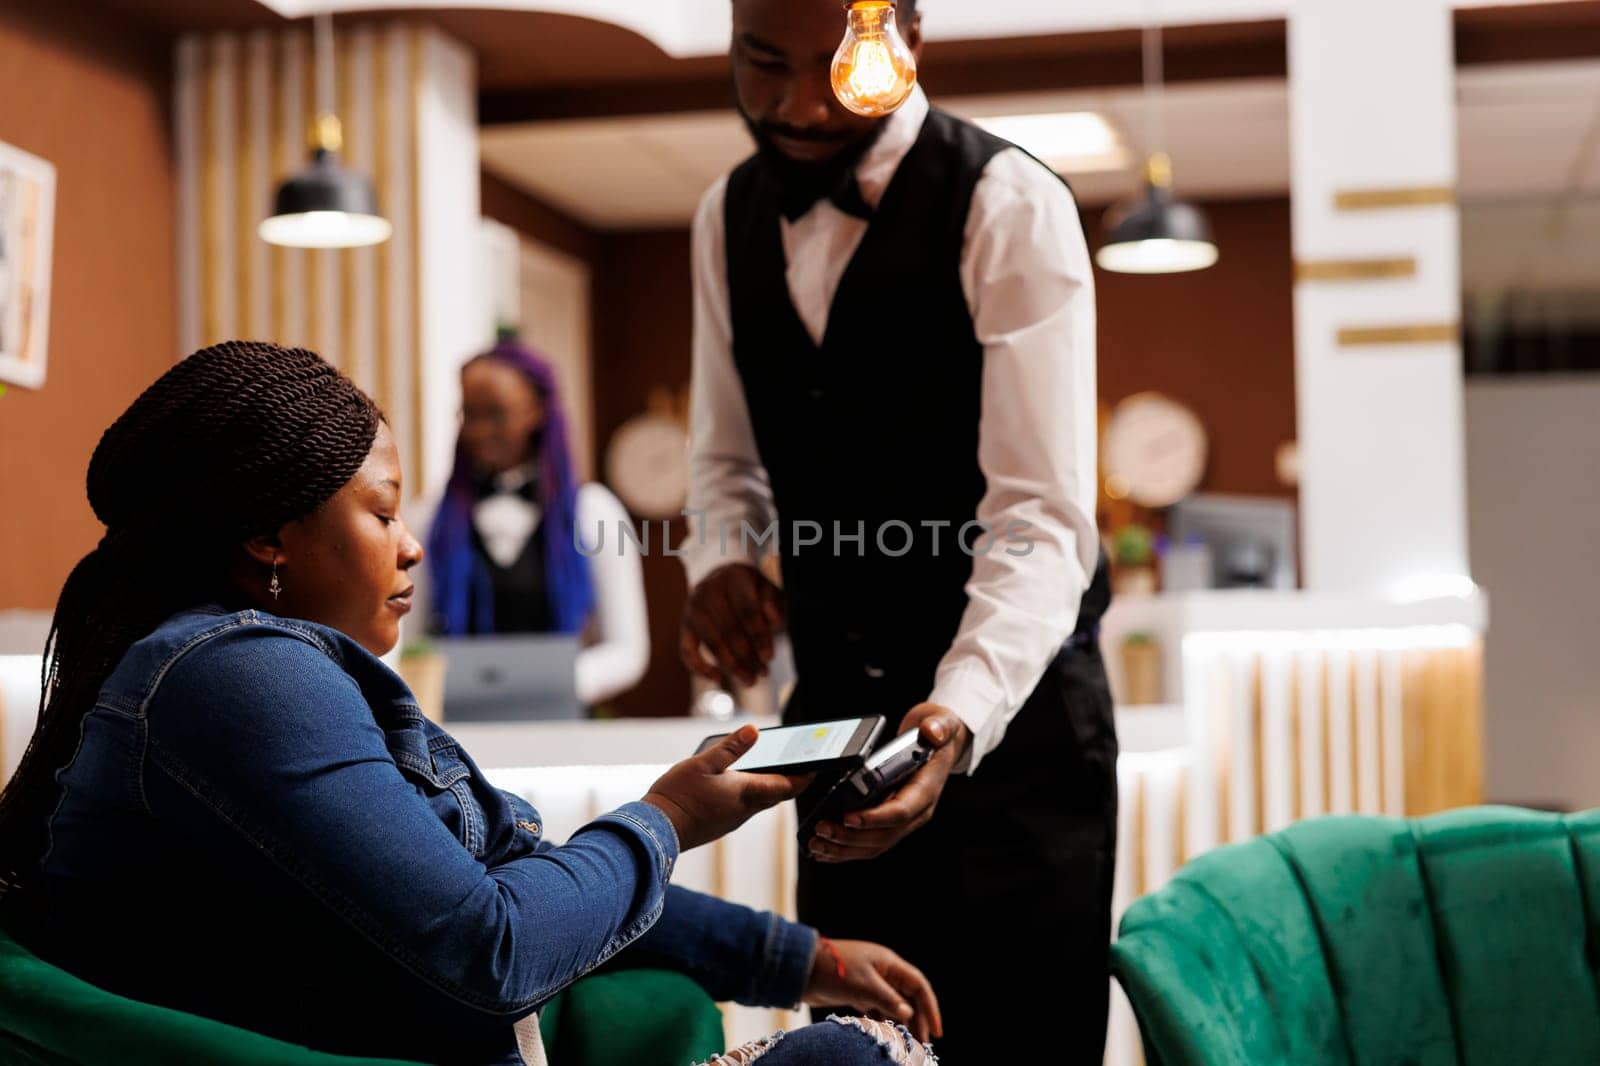 Hotel guest making contactless payment by DCStudio